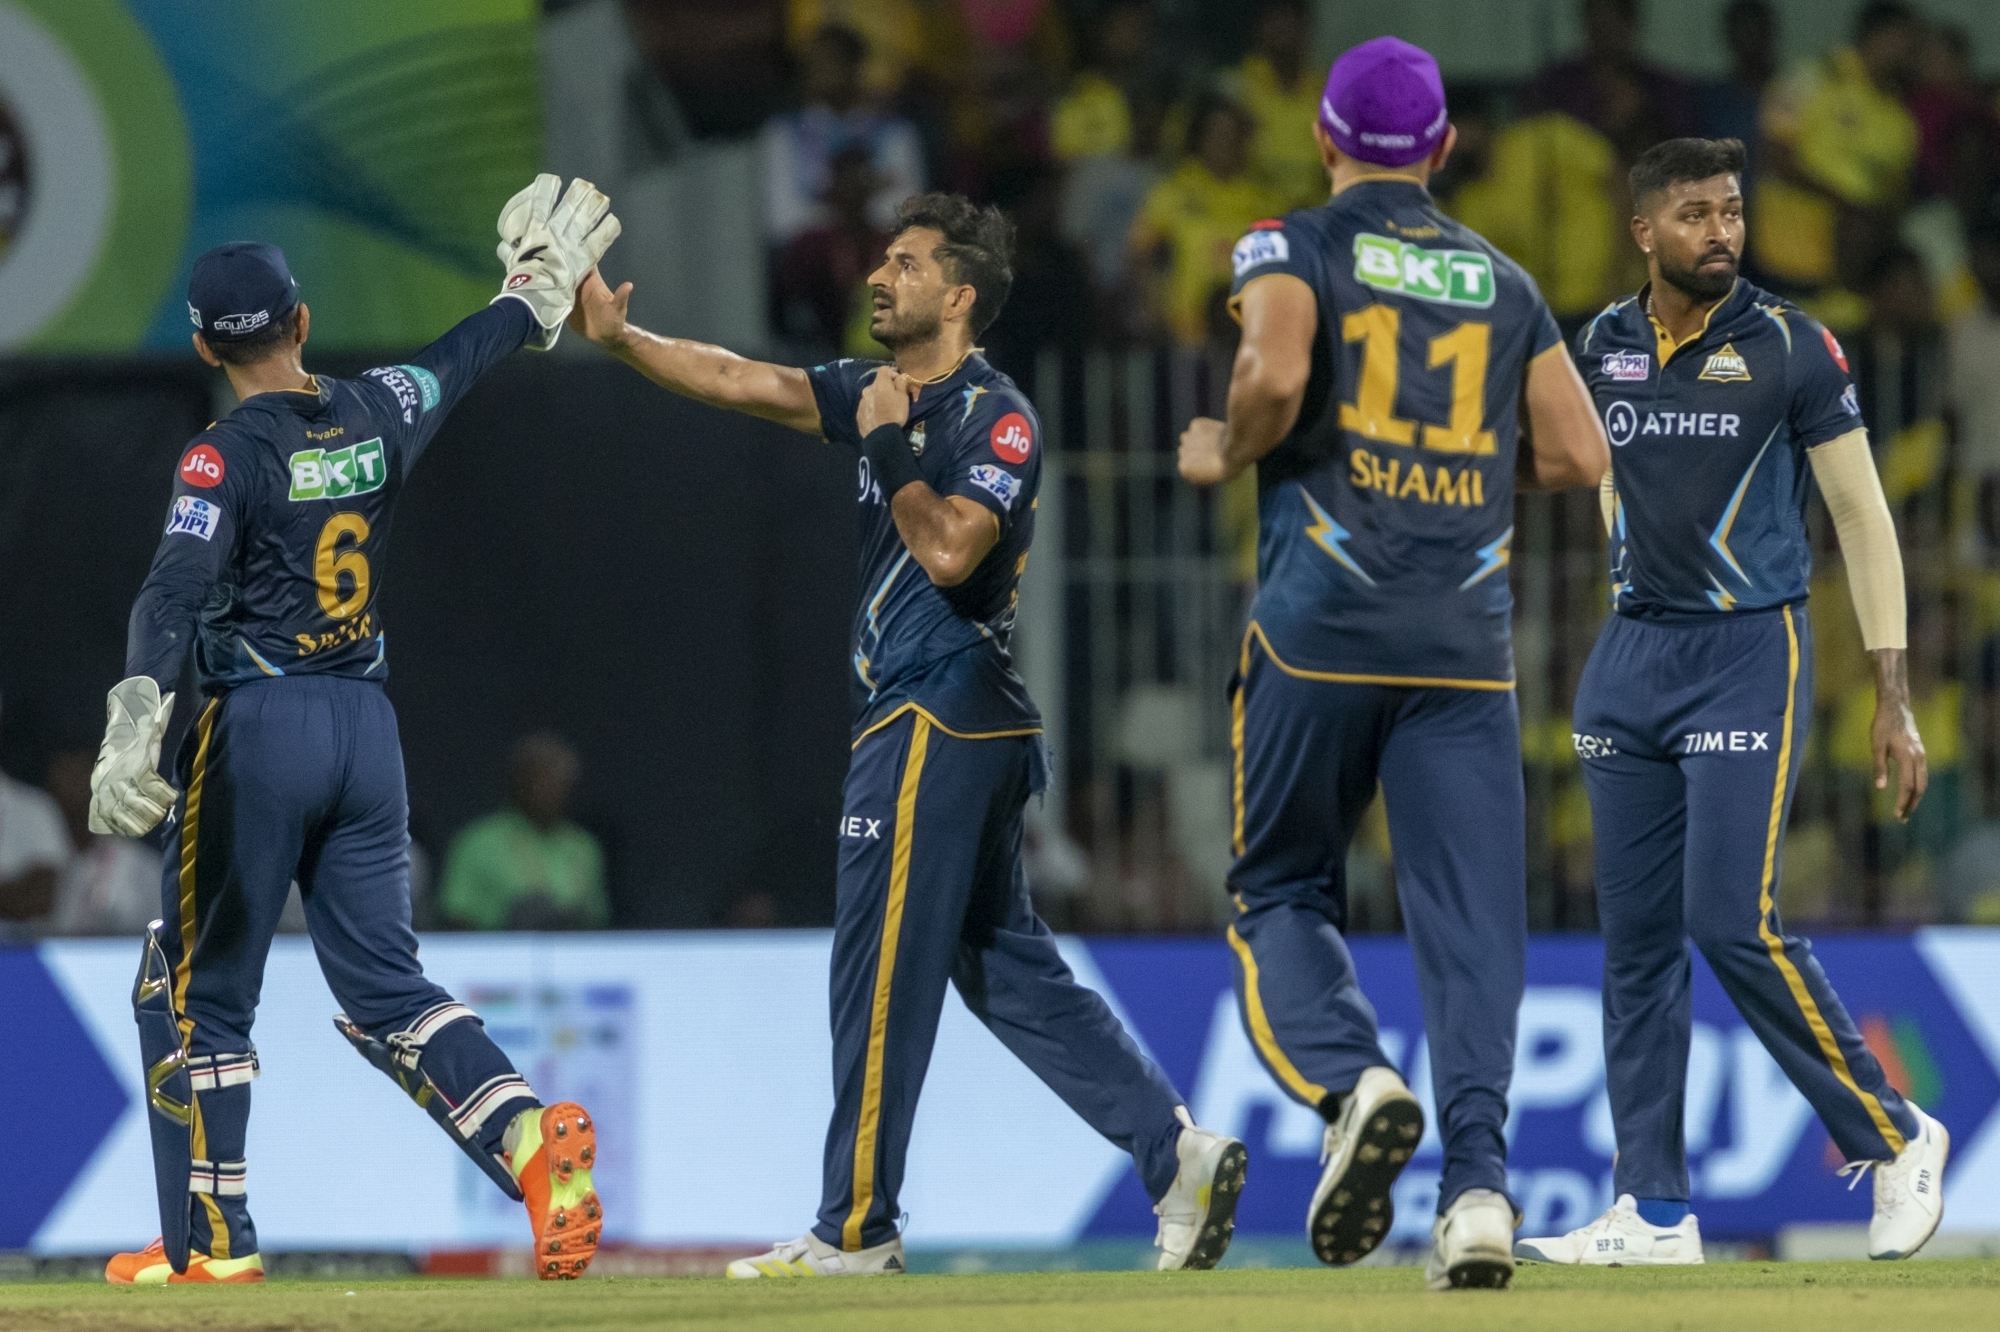  Ipl 2023: Gujarat Titans Have A Very Balanced Side Due To Match Winners, Says Aa-TeluguStop.com